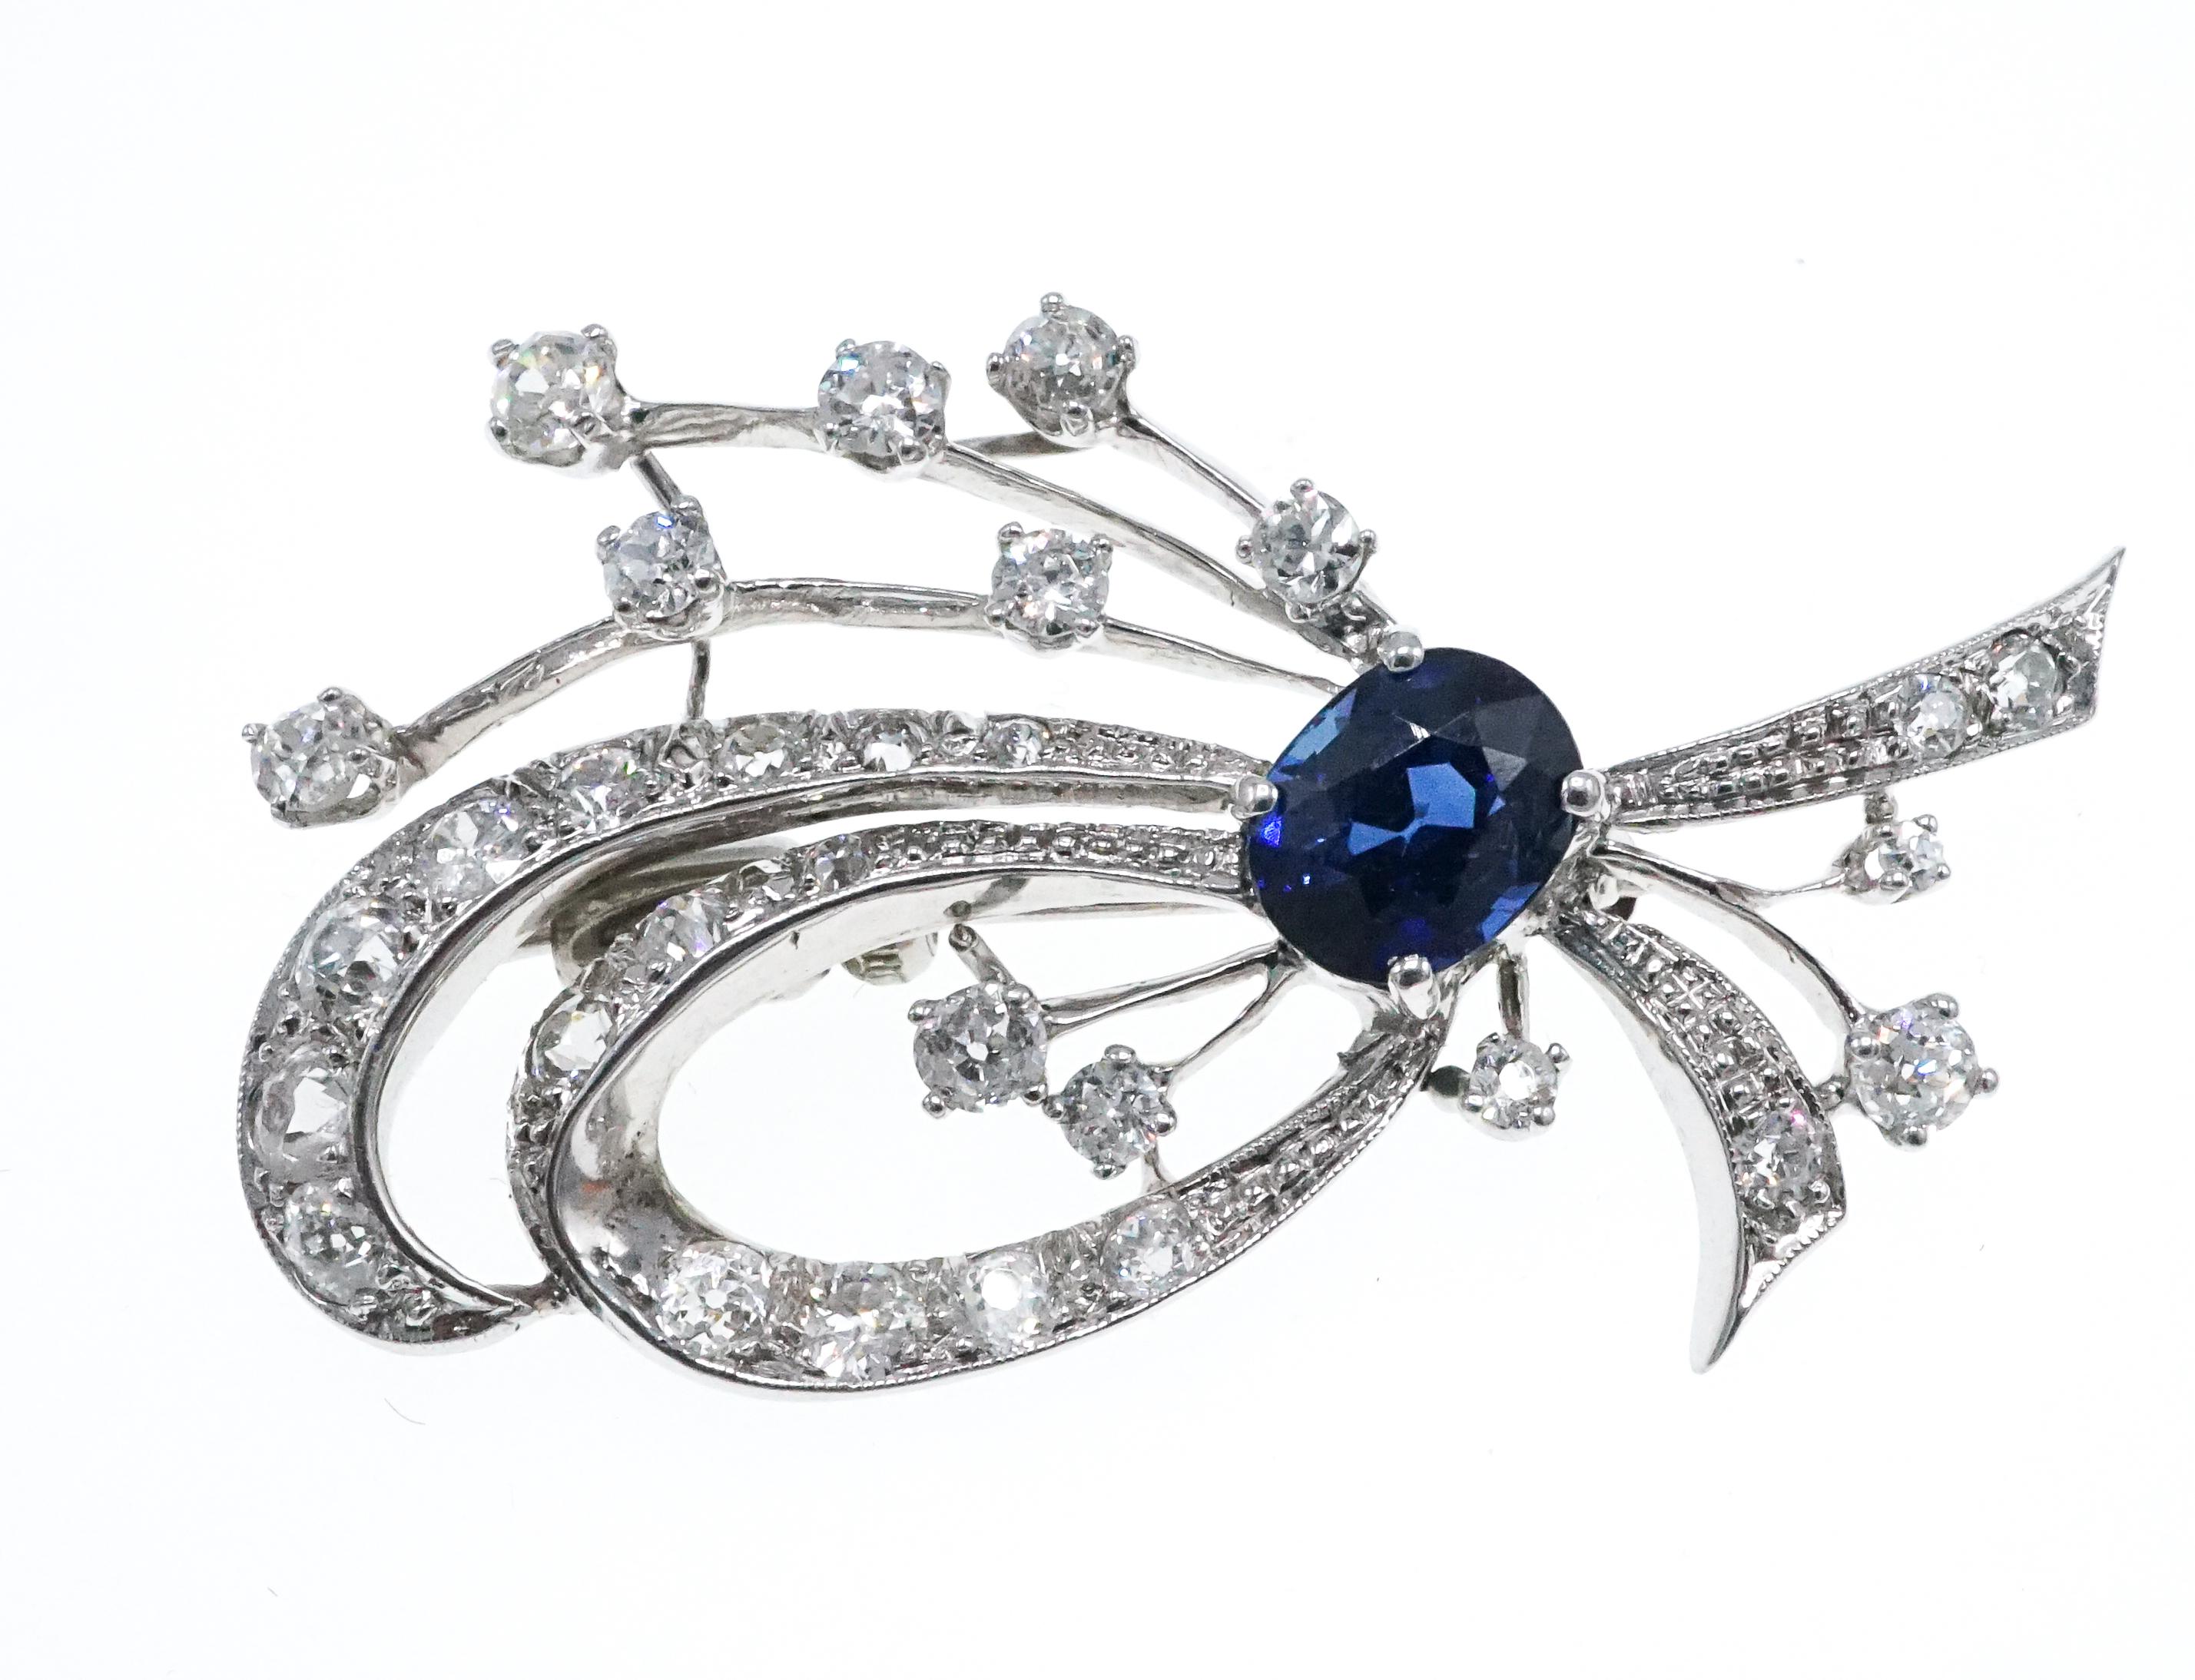 Scrolling design set with diamonds and centering on an oval sapphire

Metal: 14k white gold (tested)
Diamonds: 29 old-cut diamonds with approximate total weight of 1.50 - 1.70 carats
Sapphire: 1 oval sapphire measuring approximately 7.84 x 6.26 x